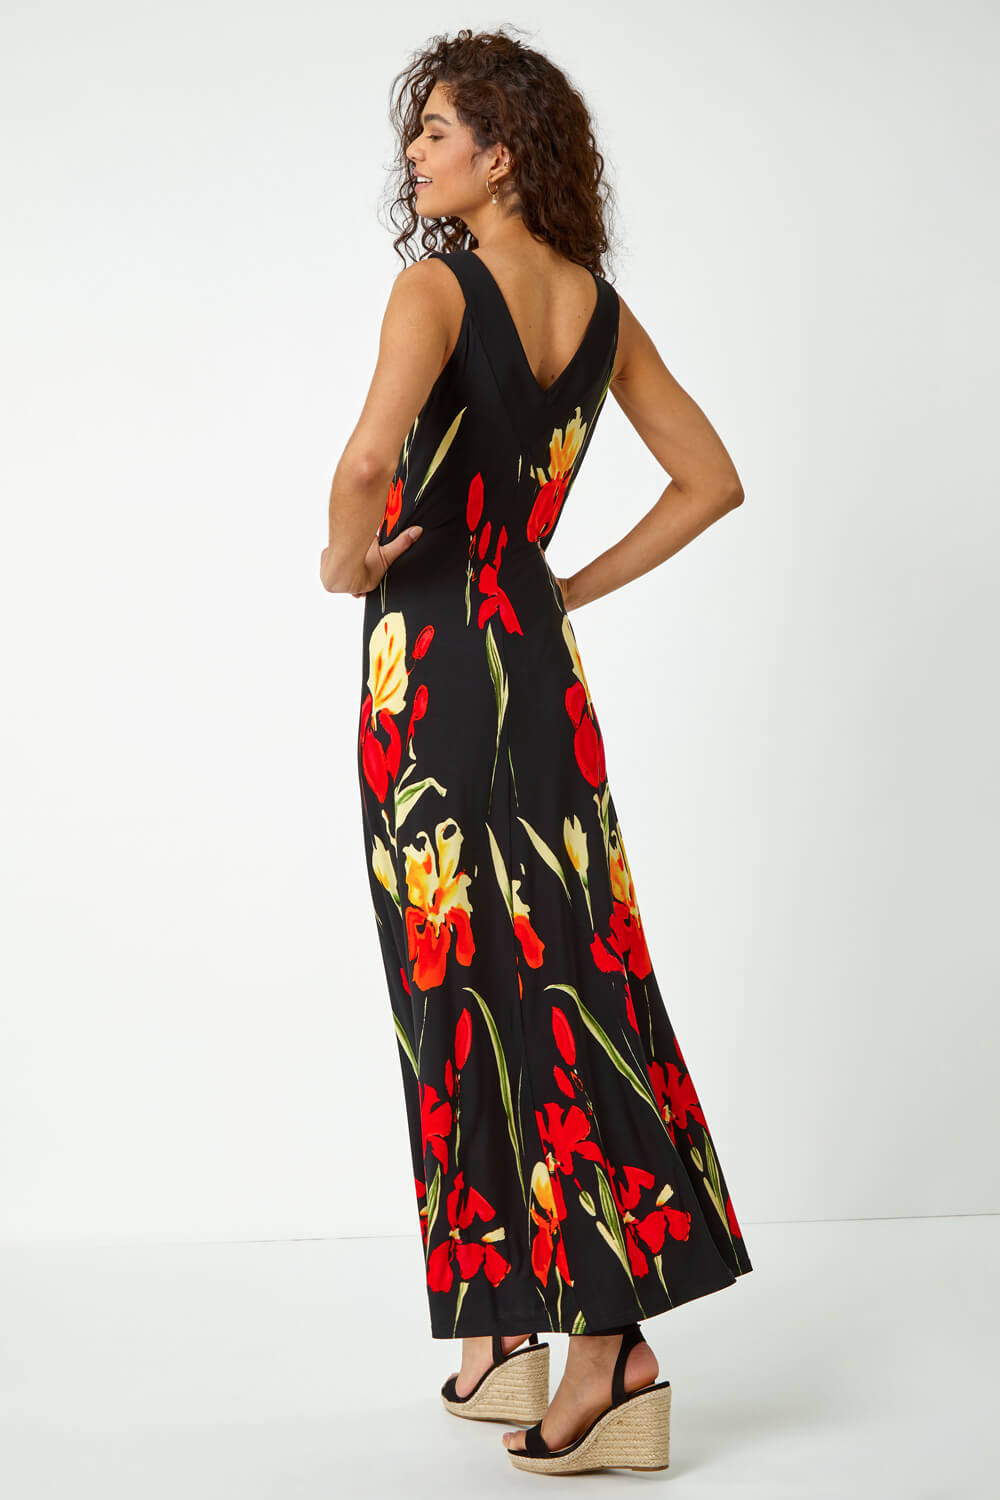 Black Floral Stretch Jersey Maxi Dress, Image 3 of 6